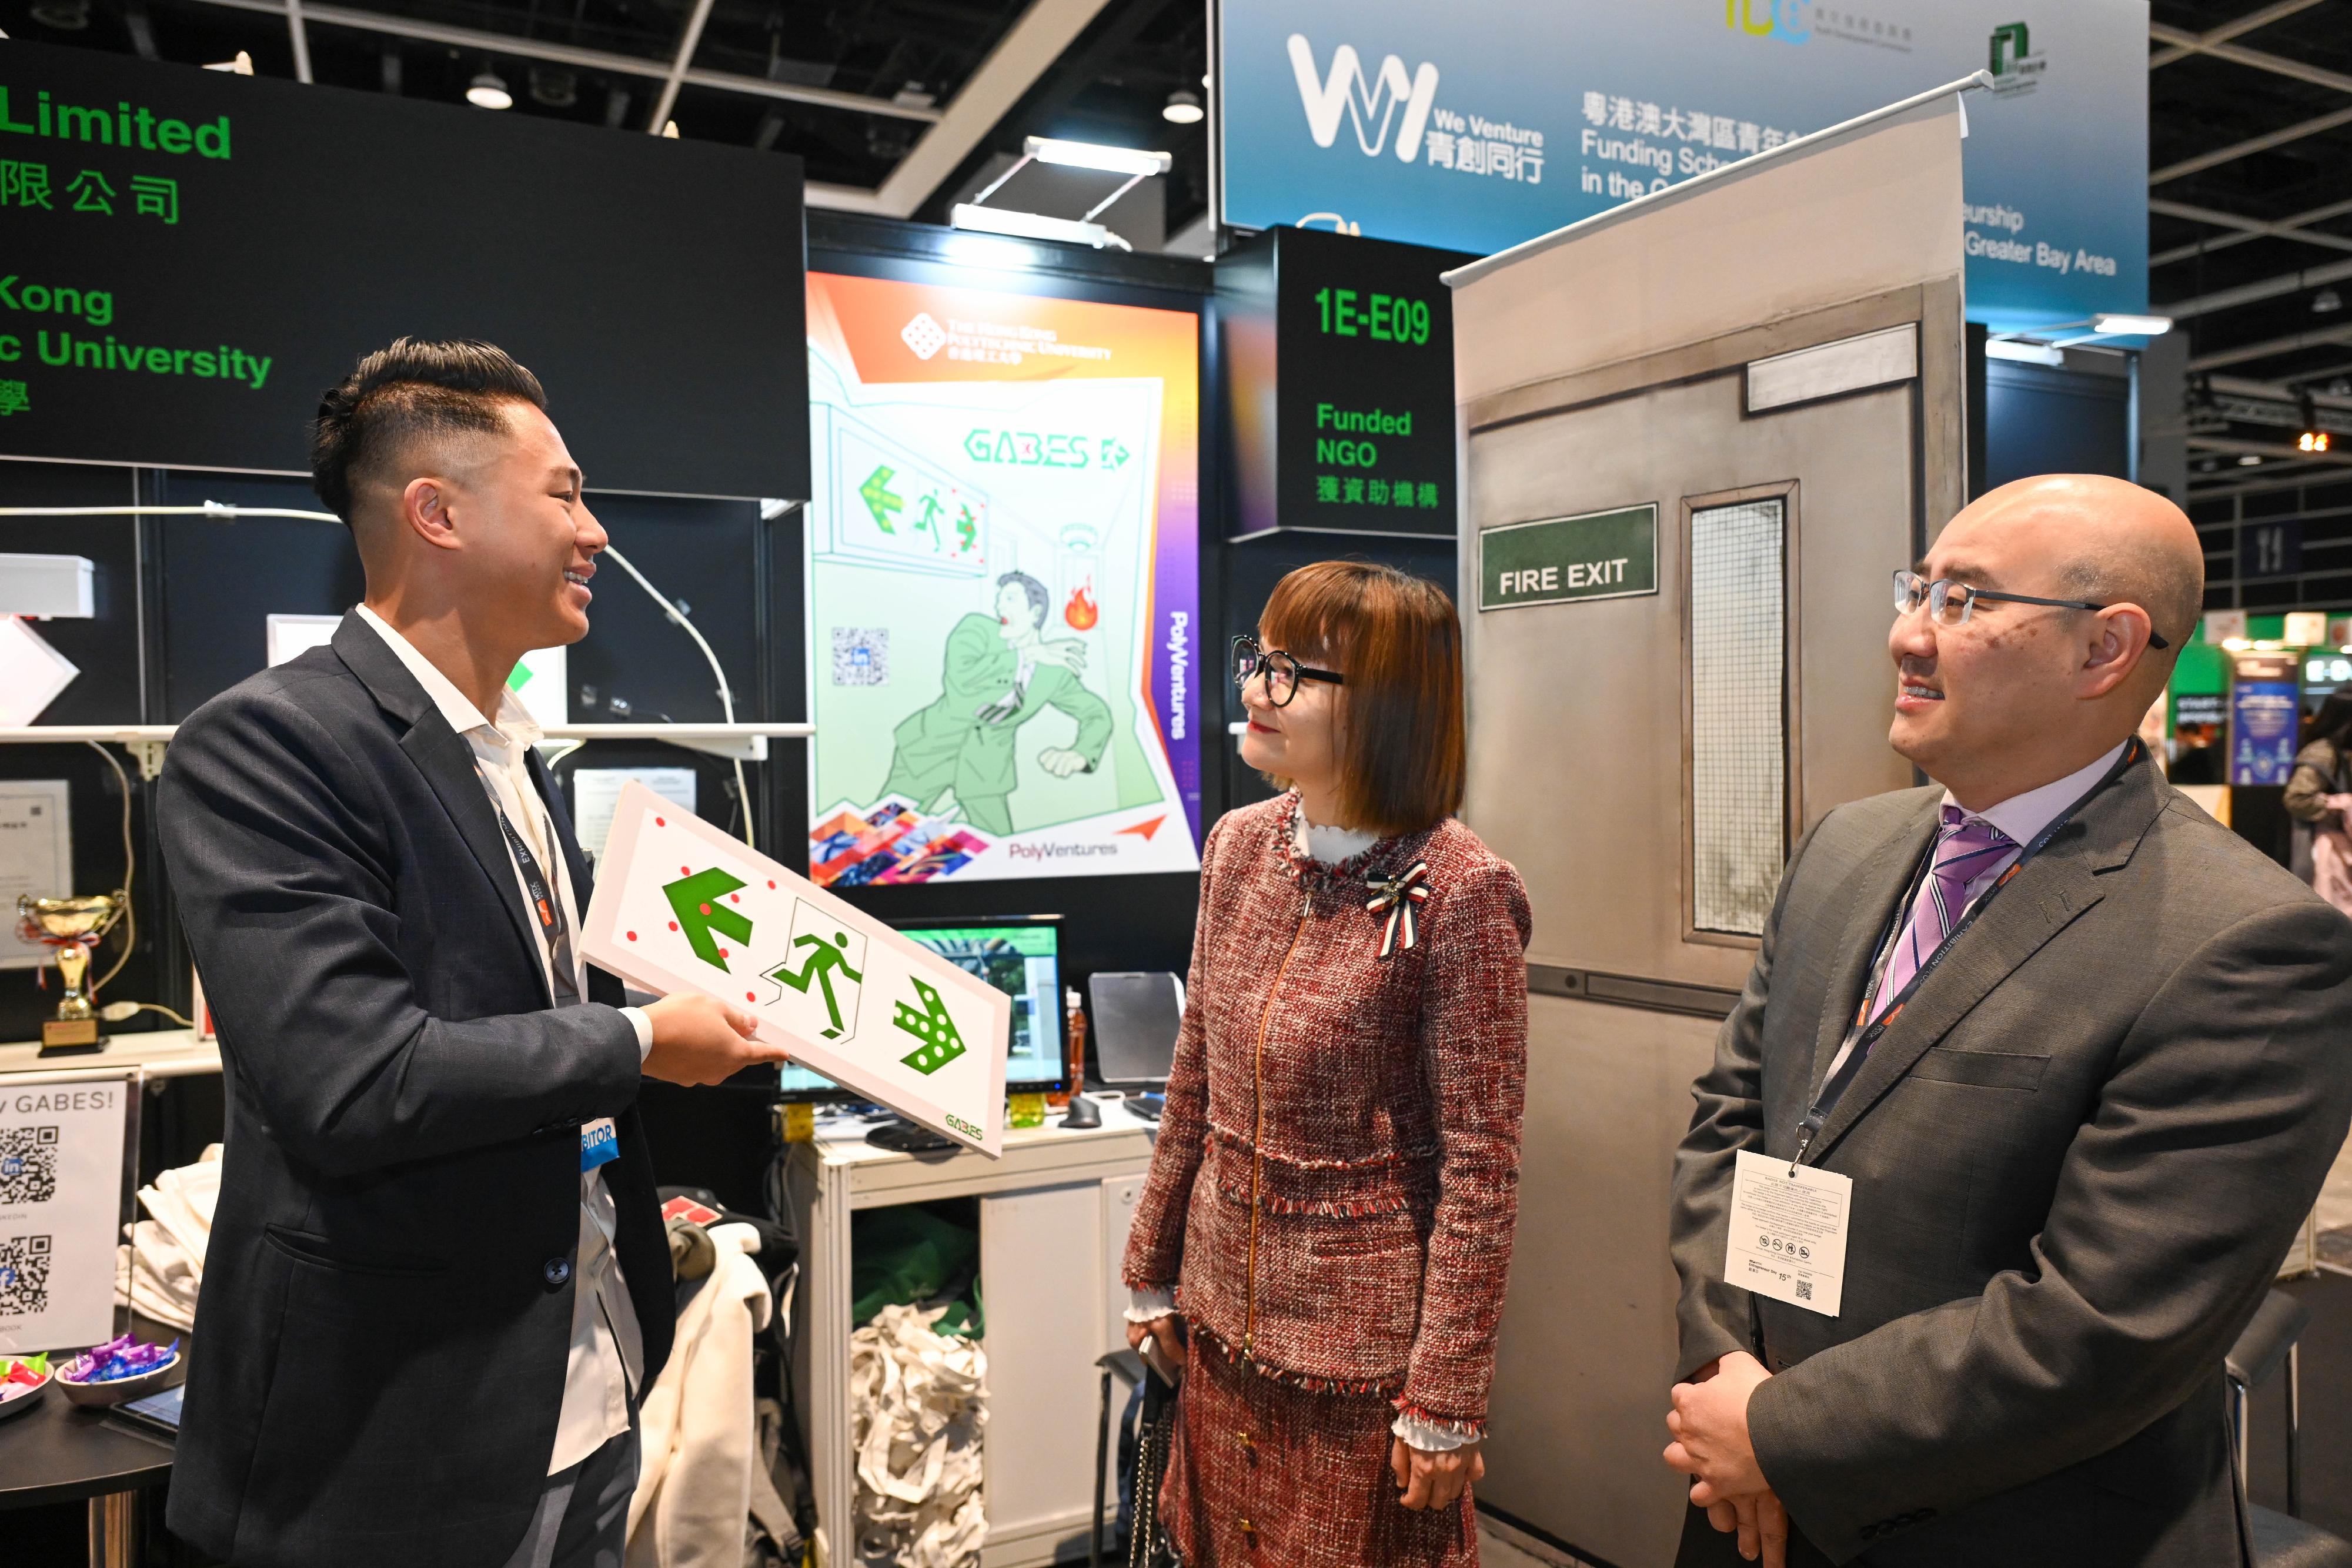 The Commissioner for the Development of the Guangdong-Hong Kong-Macao Greater Bay Area, Ms Maisie Chan (centre), visits the Entrepreneur Day exhibition today (December 7) and has candid exchanges with young entrepreneurs to learn more about their start-up stories and business operations.